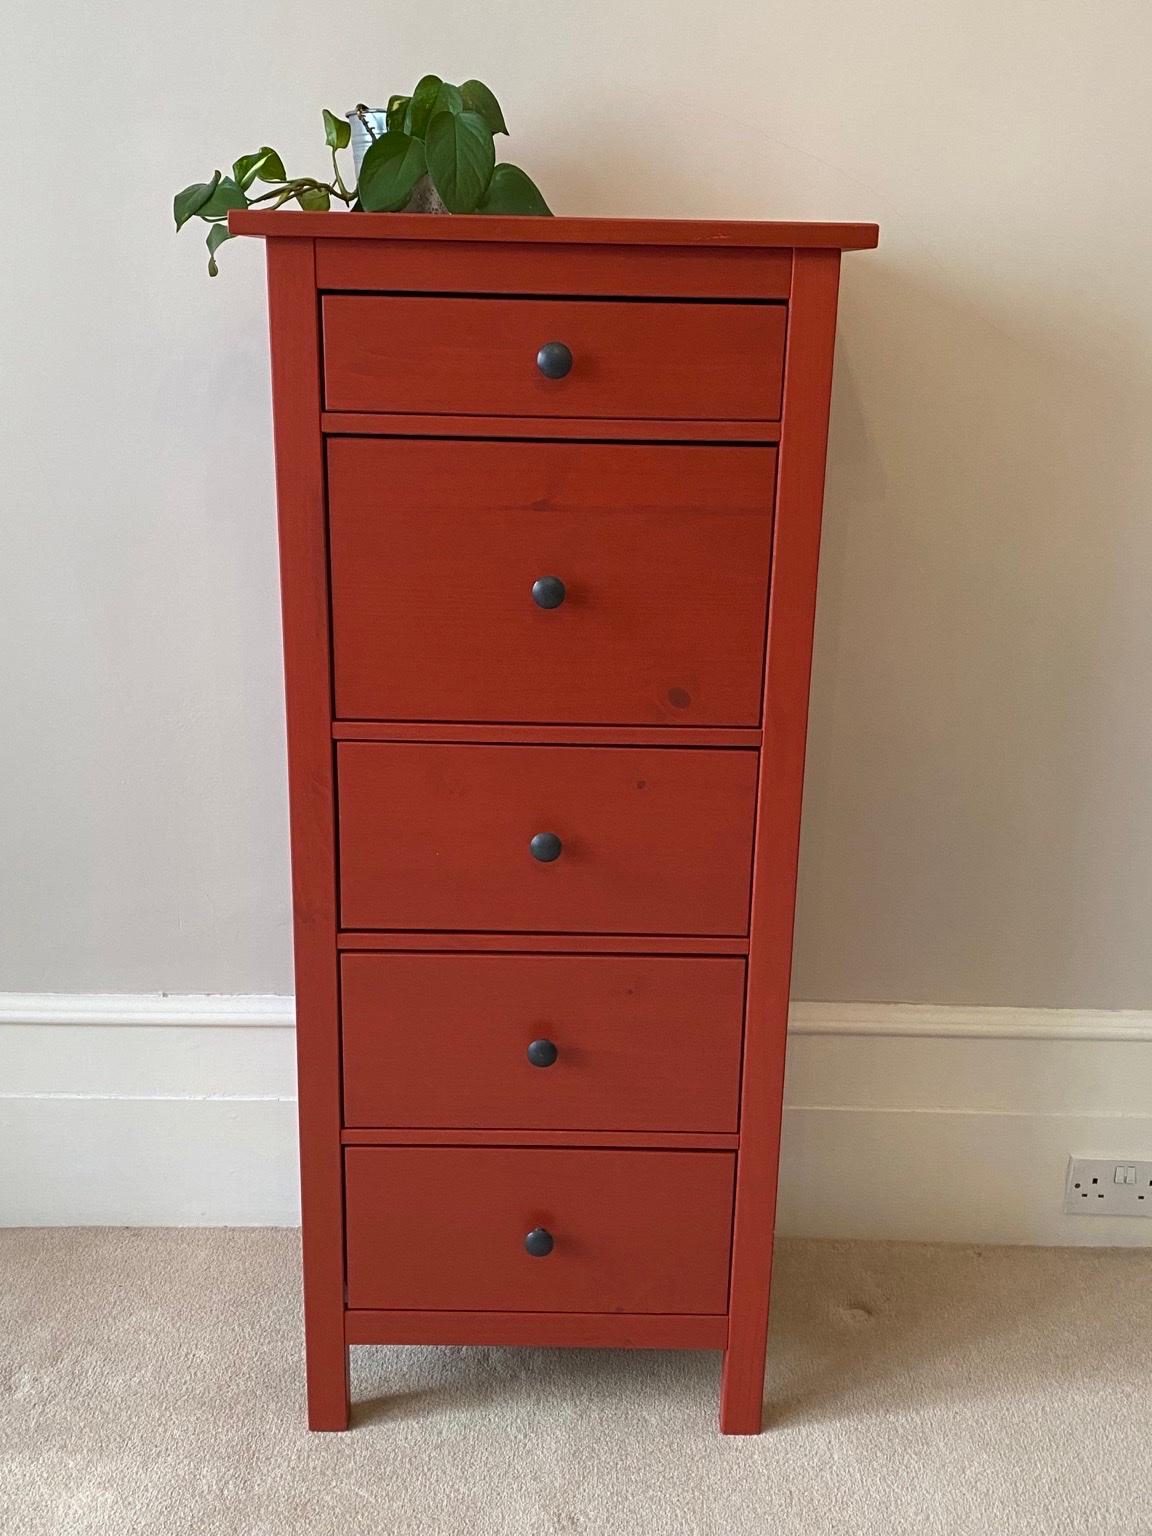 IKEA Hemnes Tallboy Chest of Drawers Red in N19 London Borough of ...